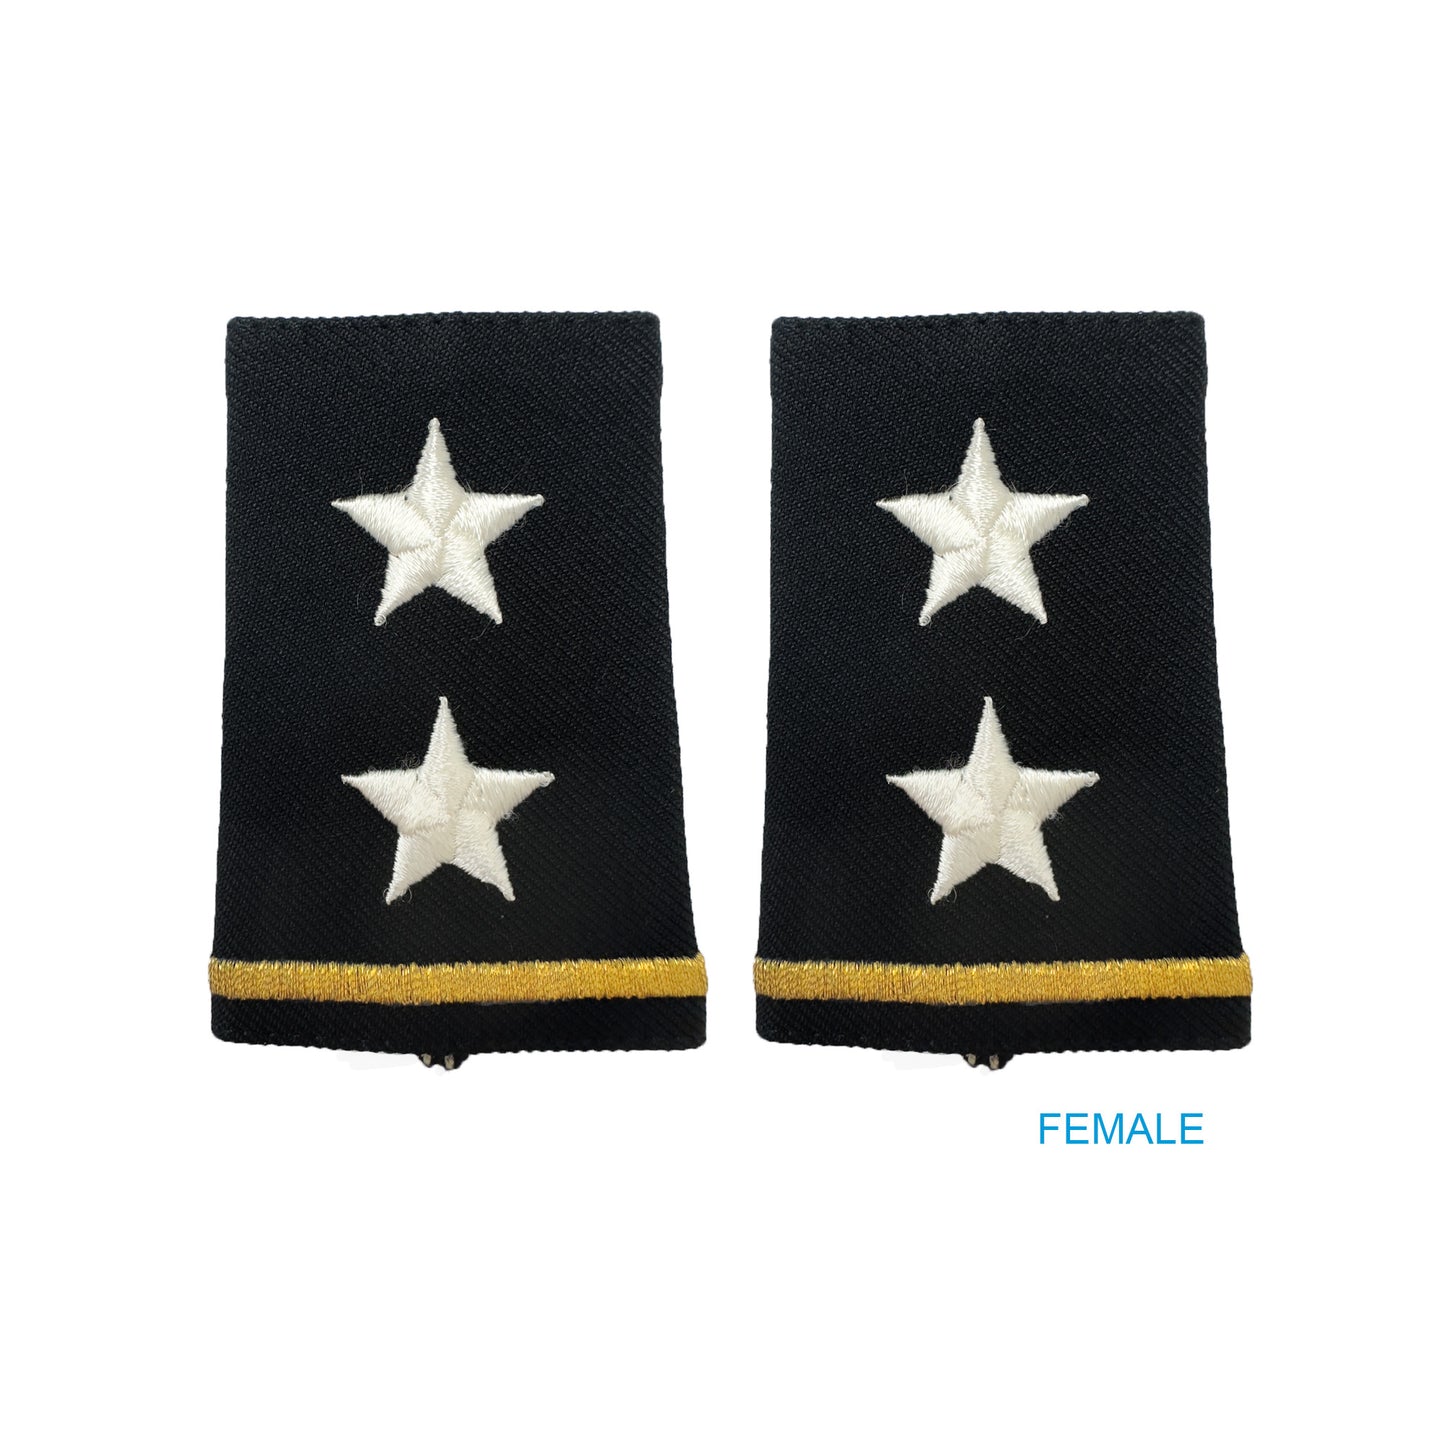 US Army O8 Major General Shoulder Marks - Small/Female